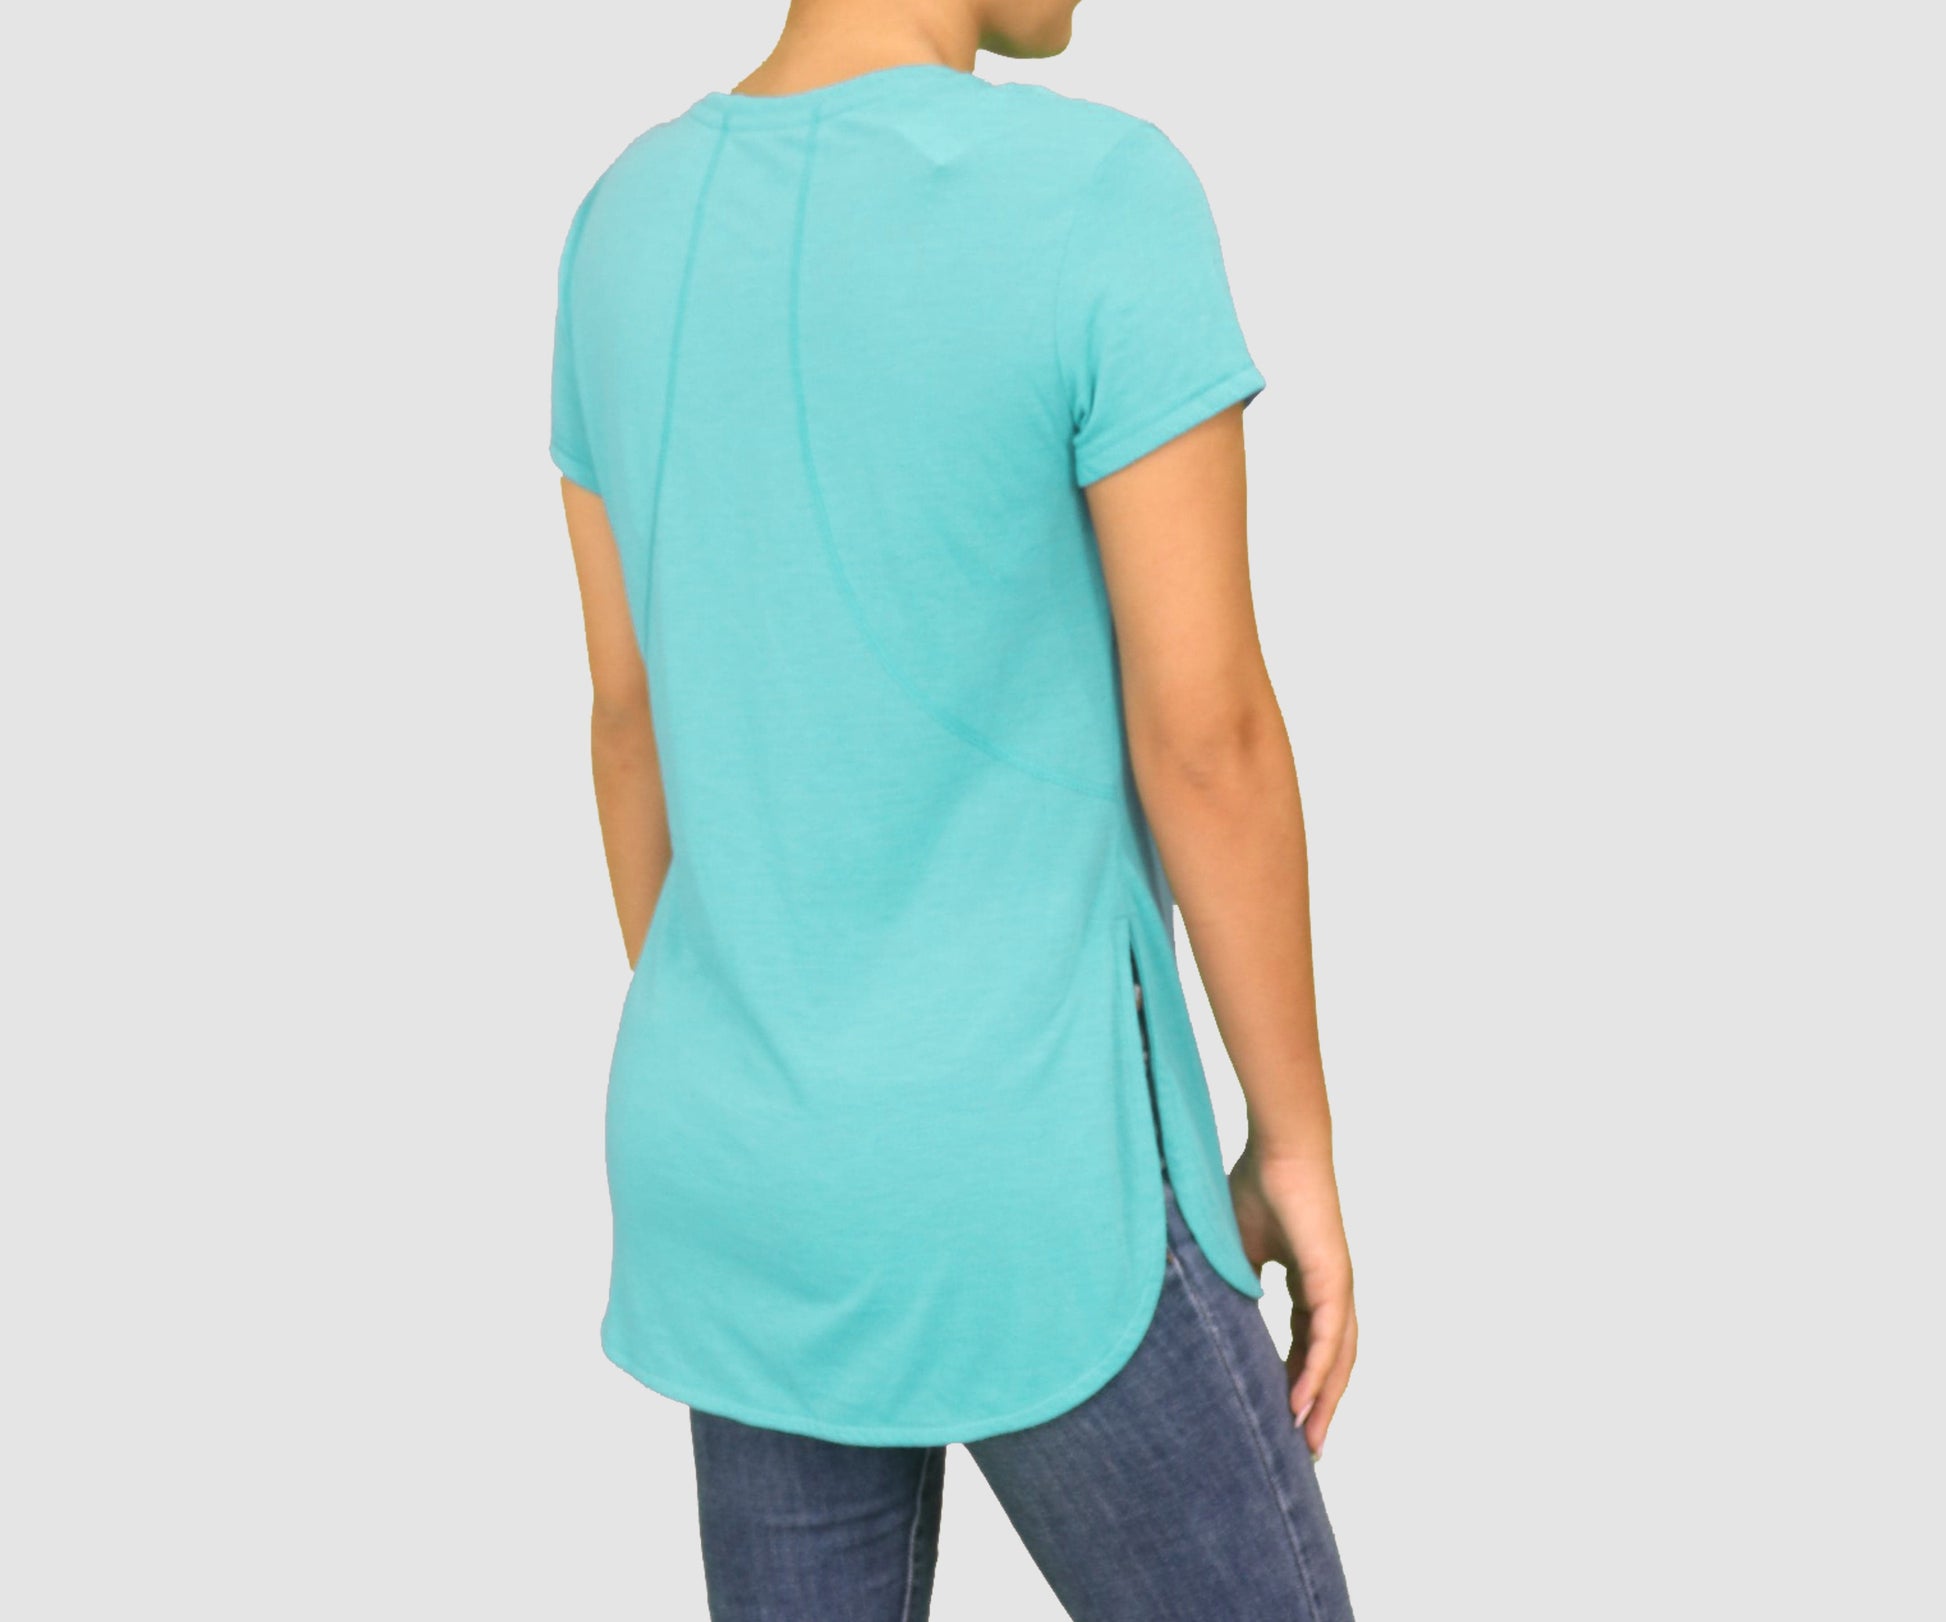 ATHLETIC WORKS Womens Tops Small / Teal Short Sleeve Top